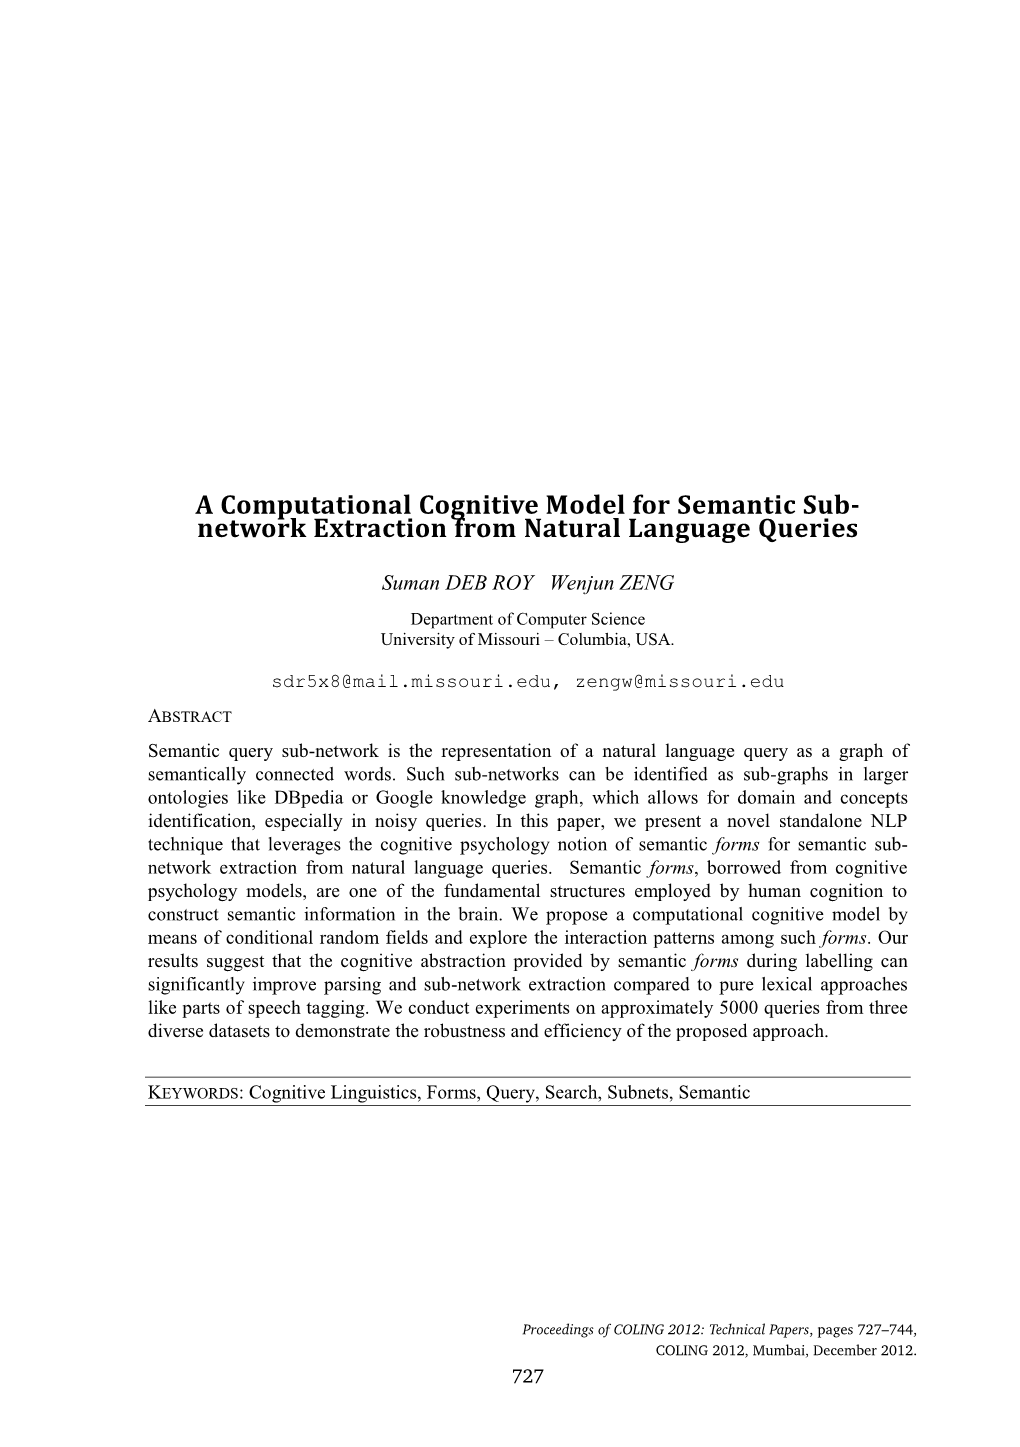 A Computational Cognitive Model for Semantic Sub-Network Extraction from Natural Language Queries